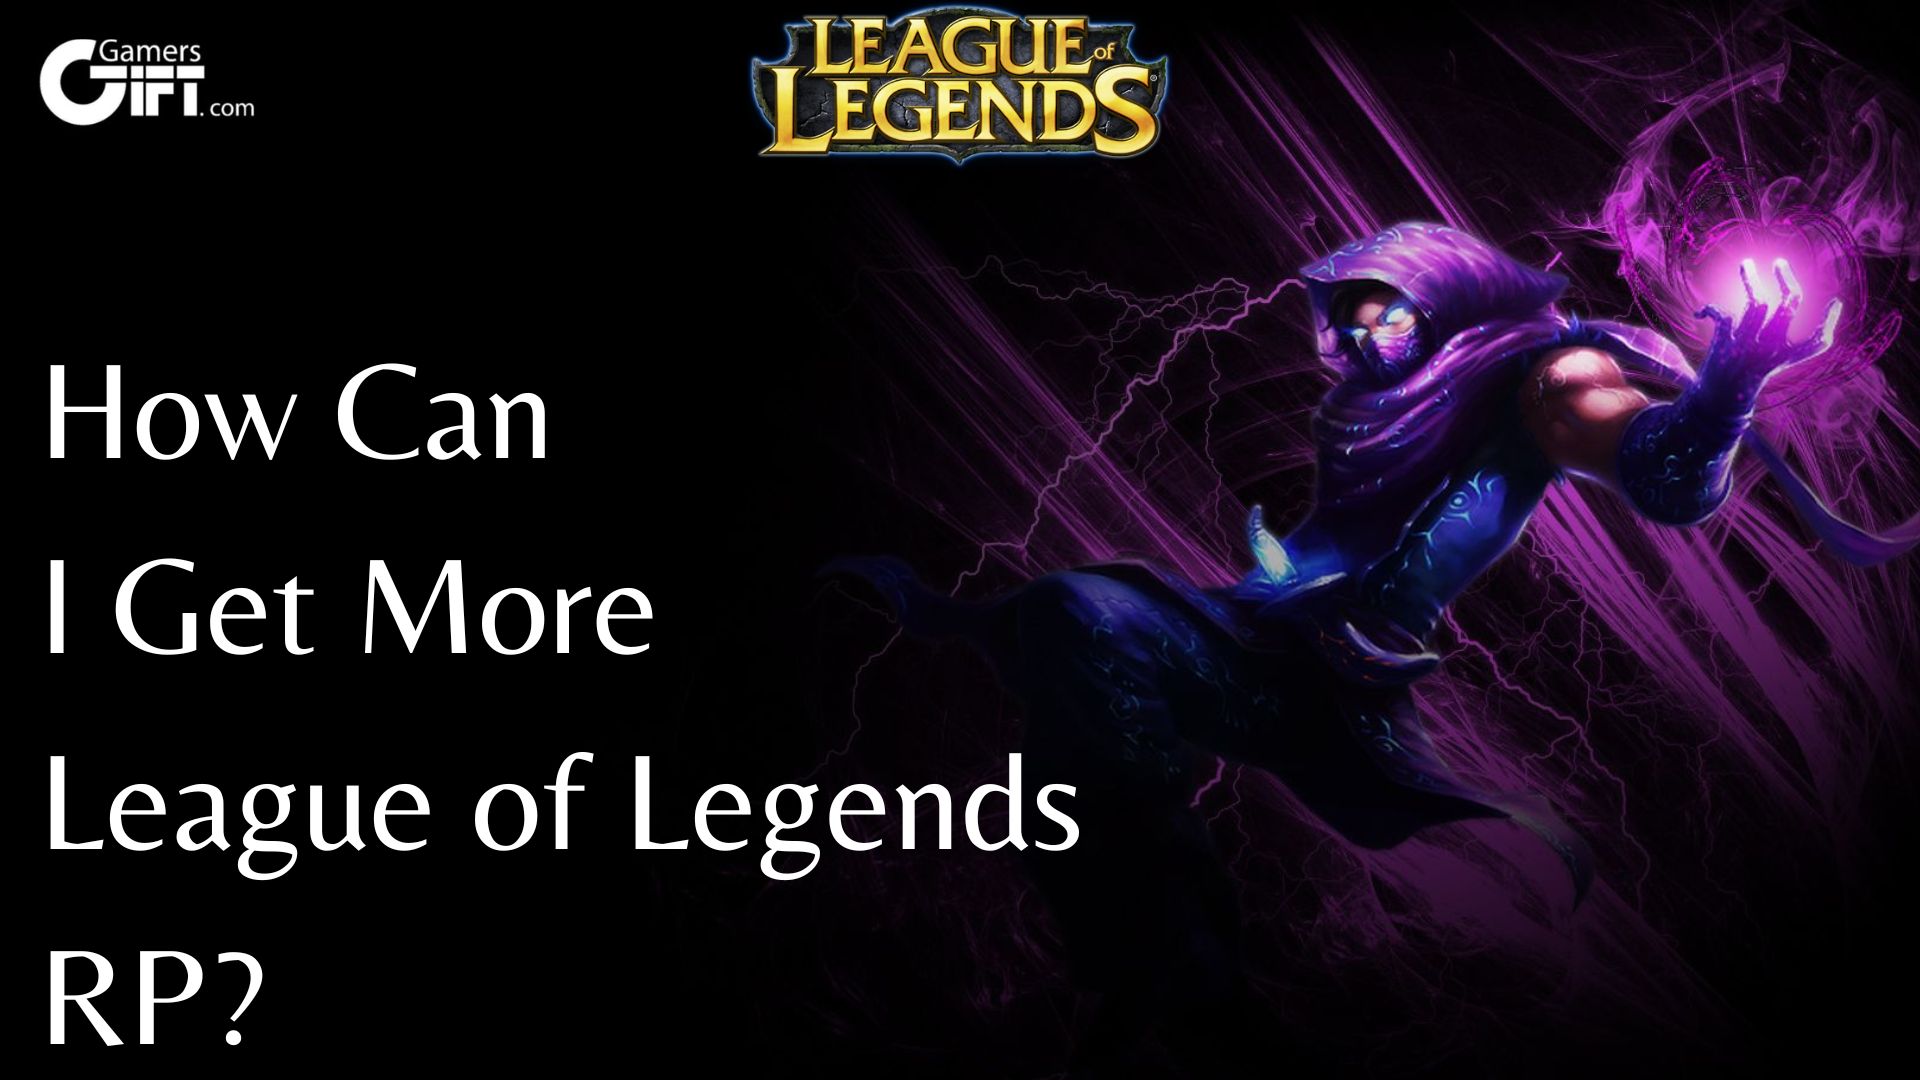 How Can I Get More League of Legends RP?